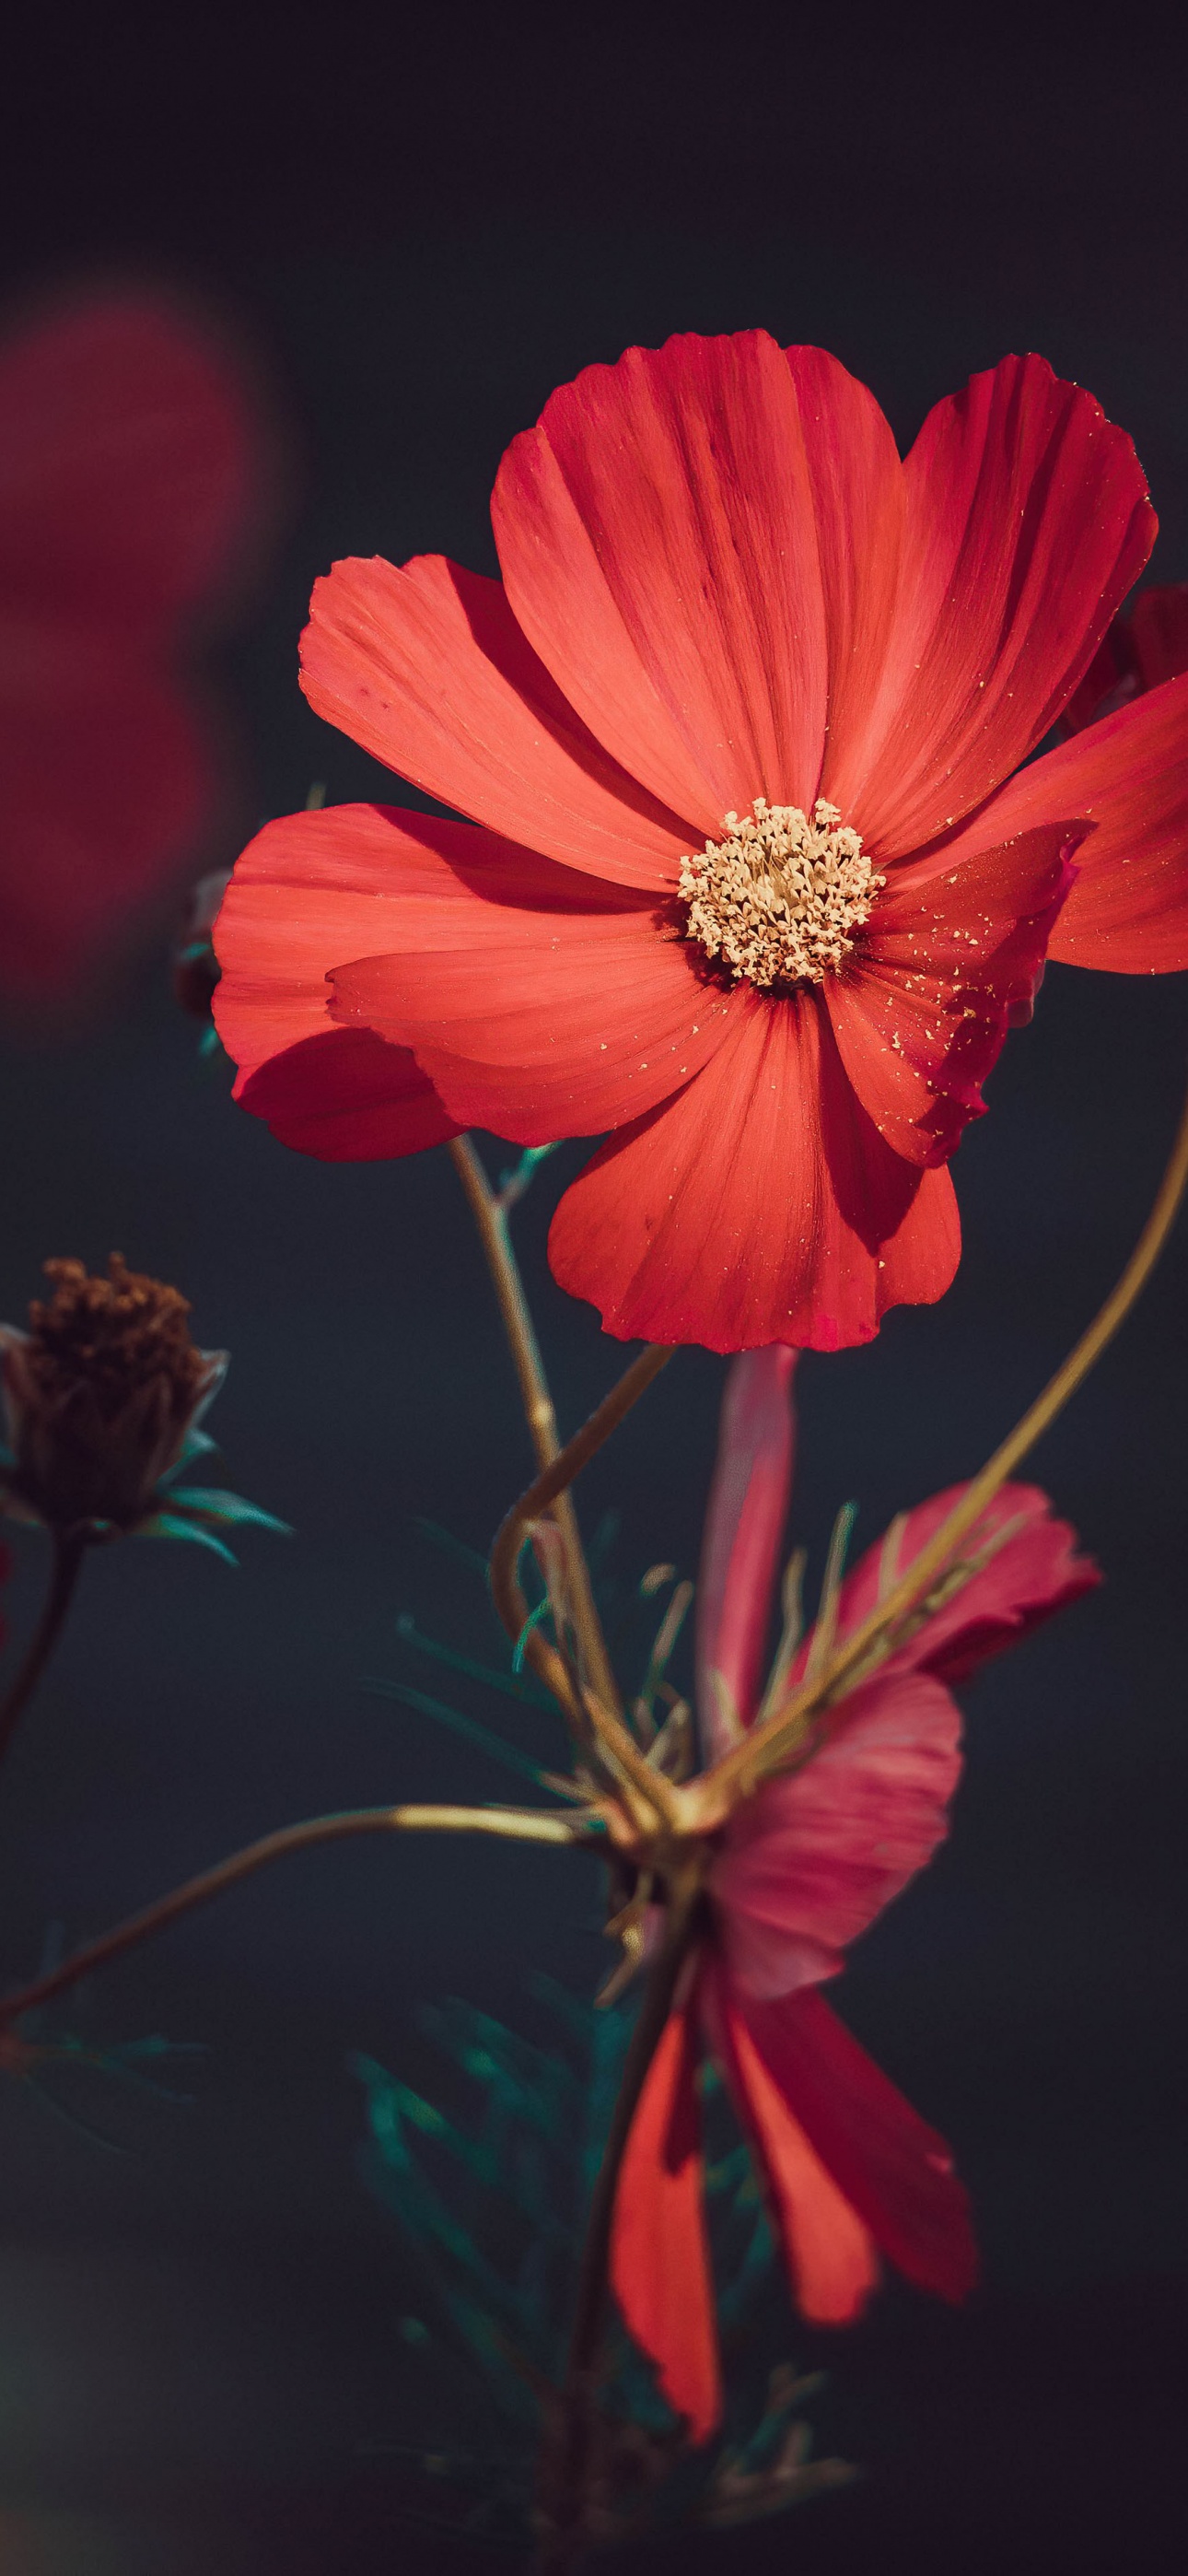 A red flower with green leaves and stem - Dark orange